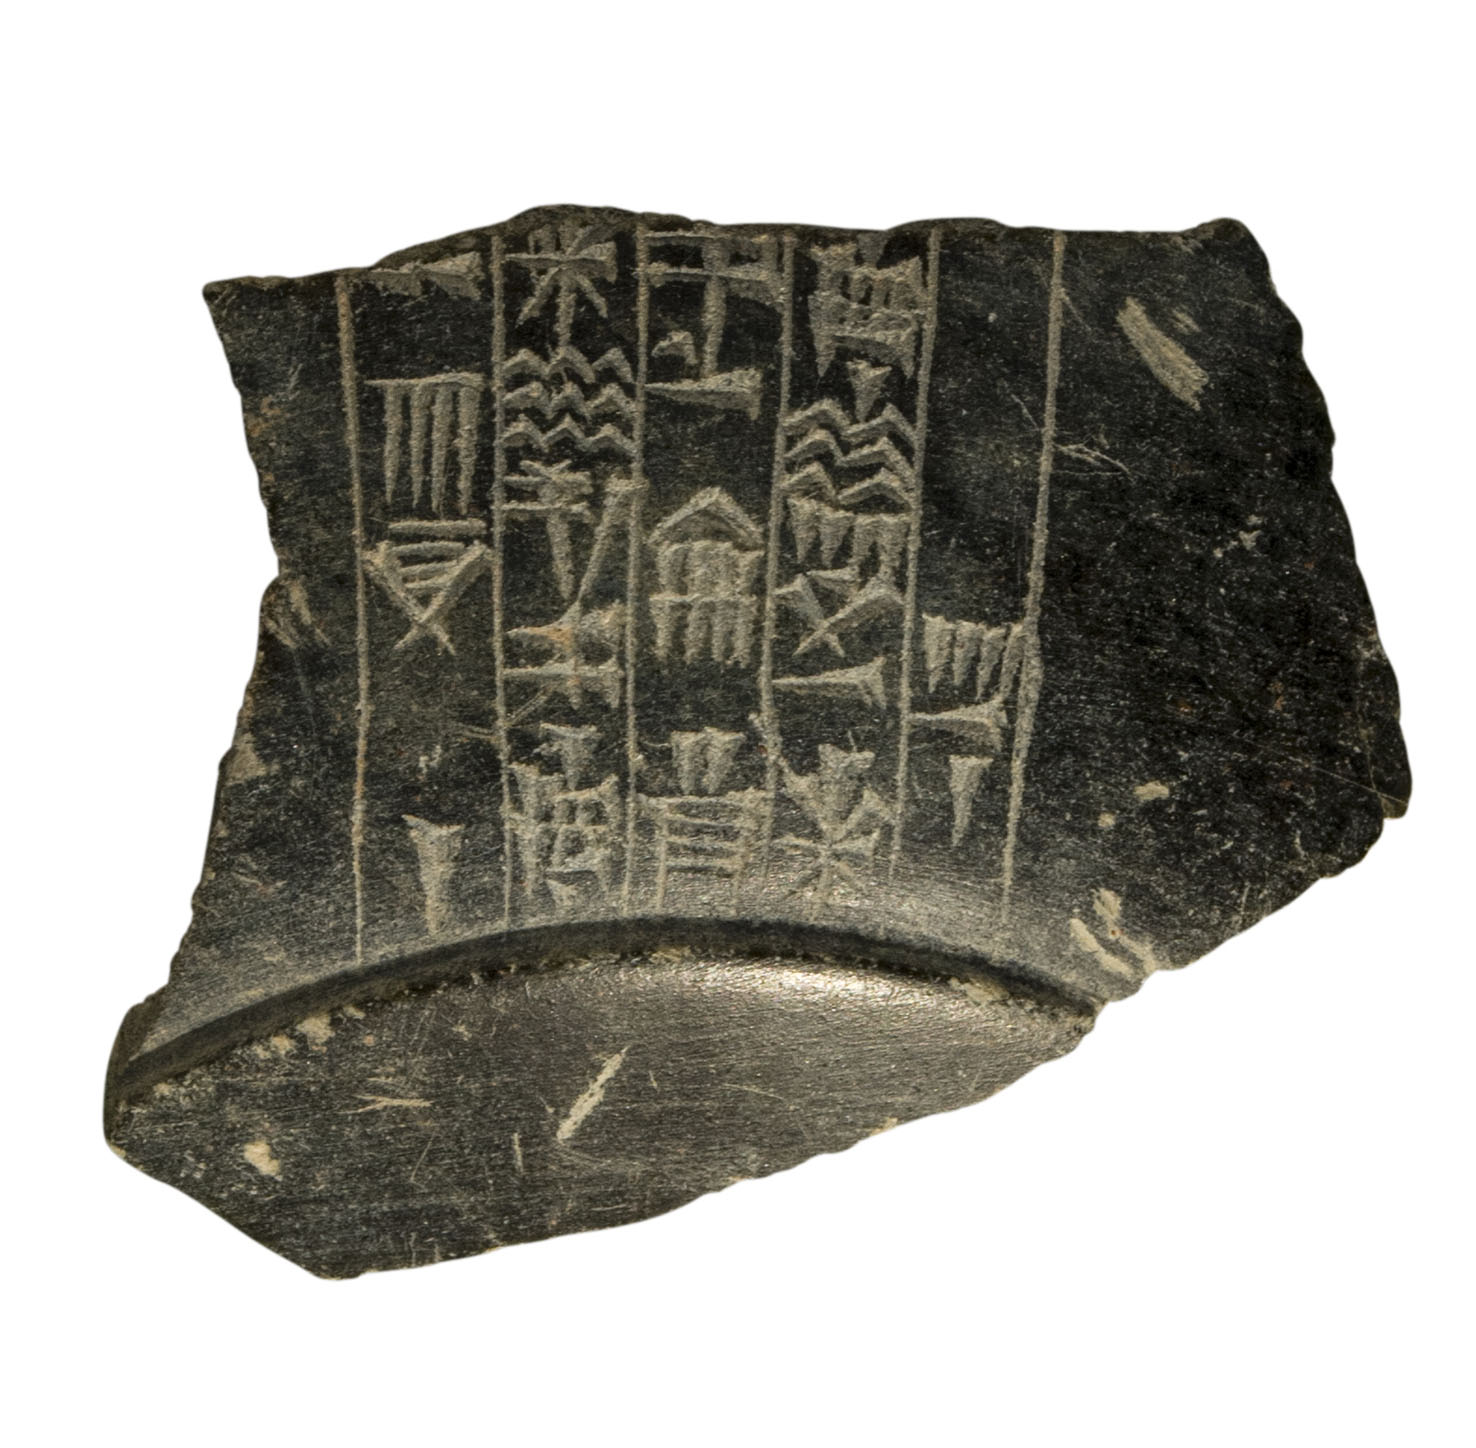 1_Vessel fragment with inscription